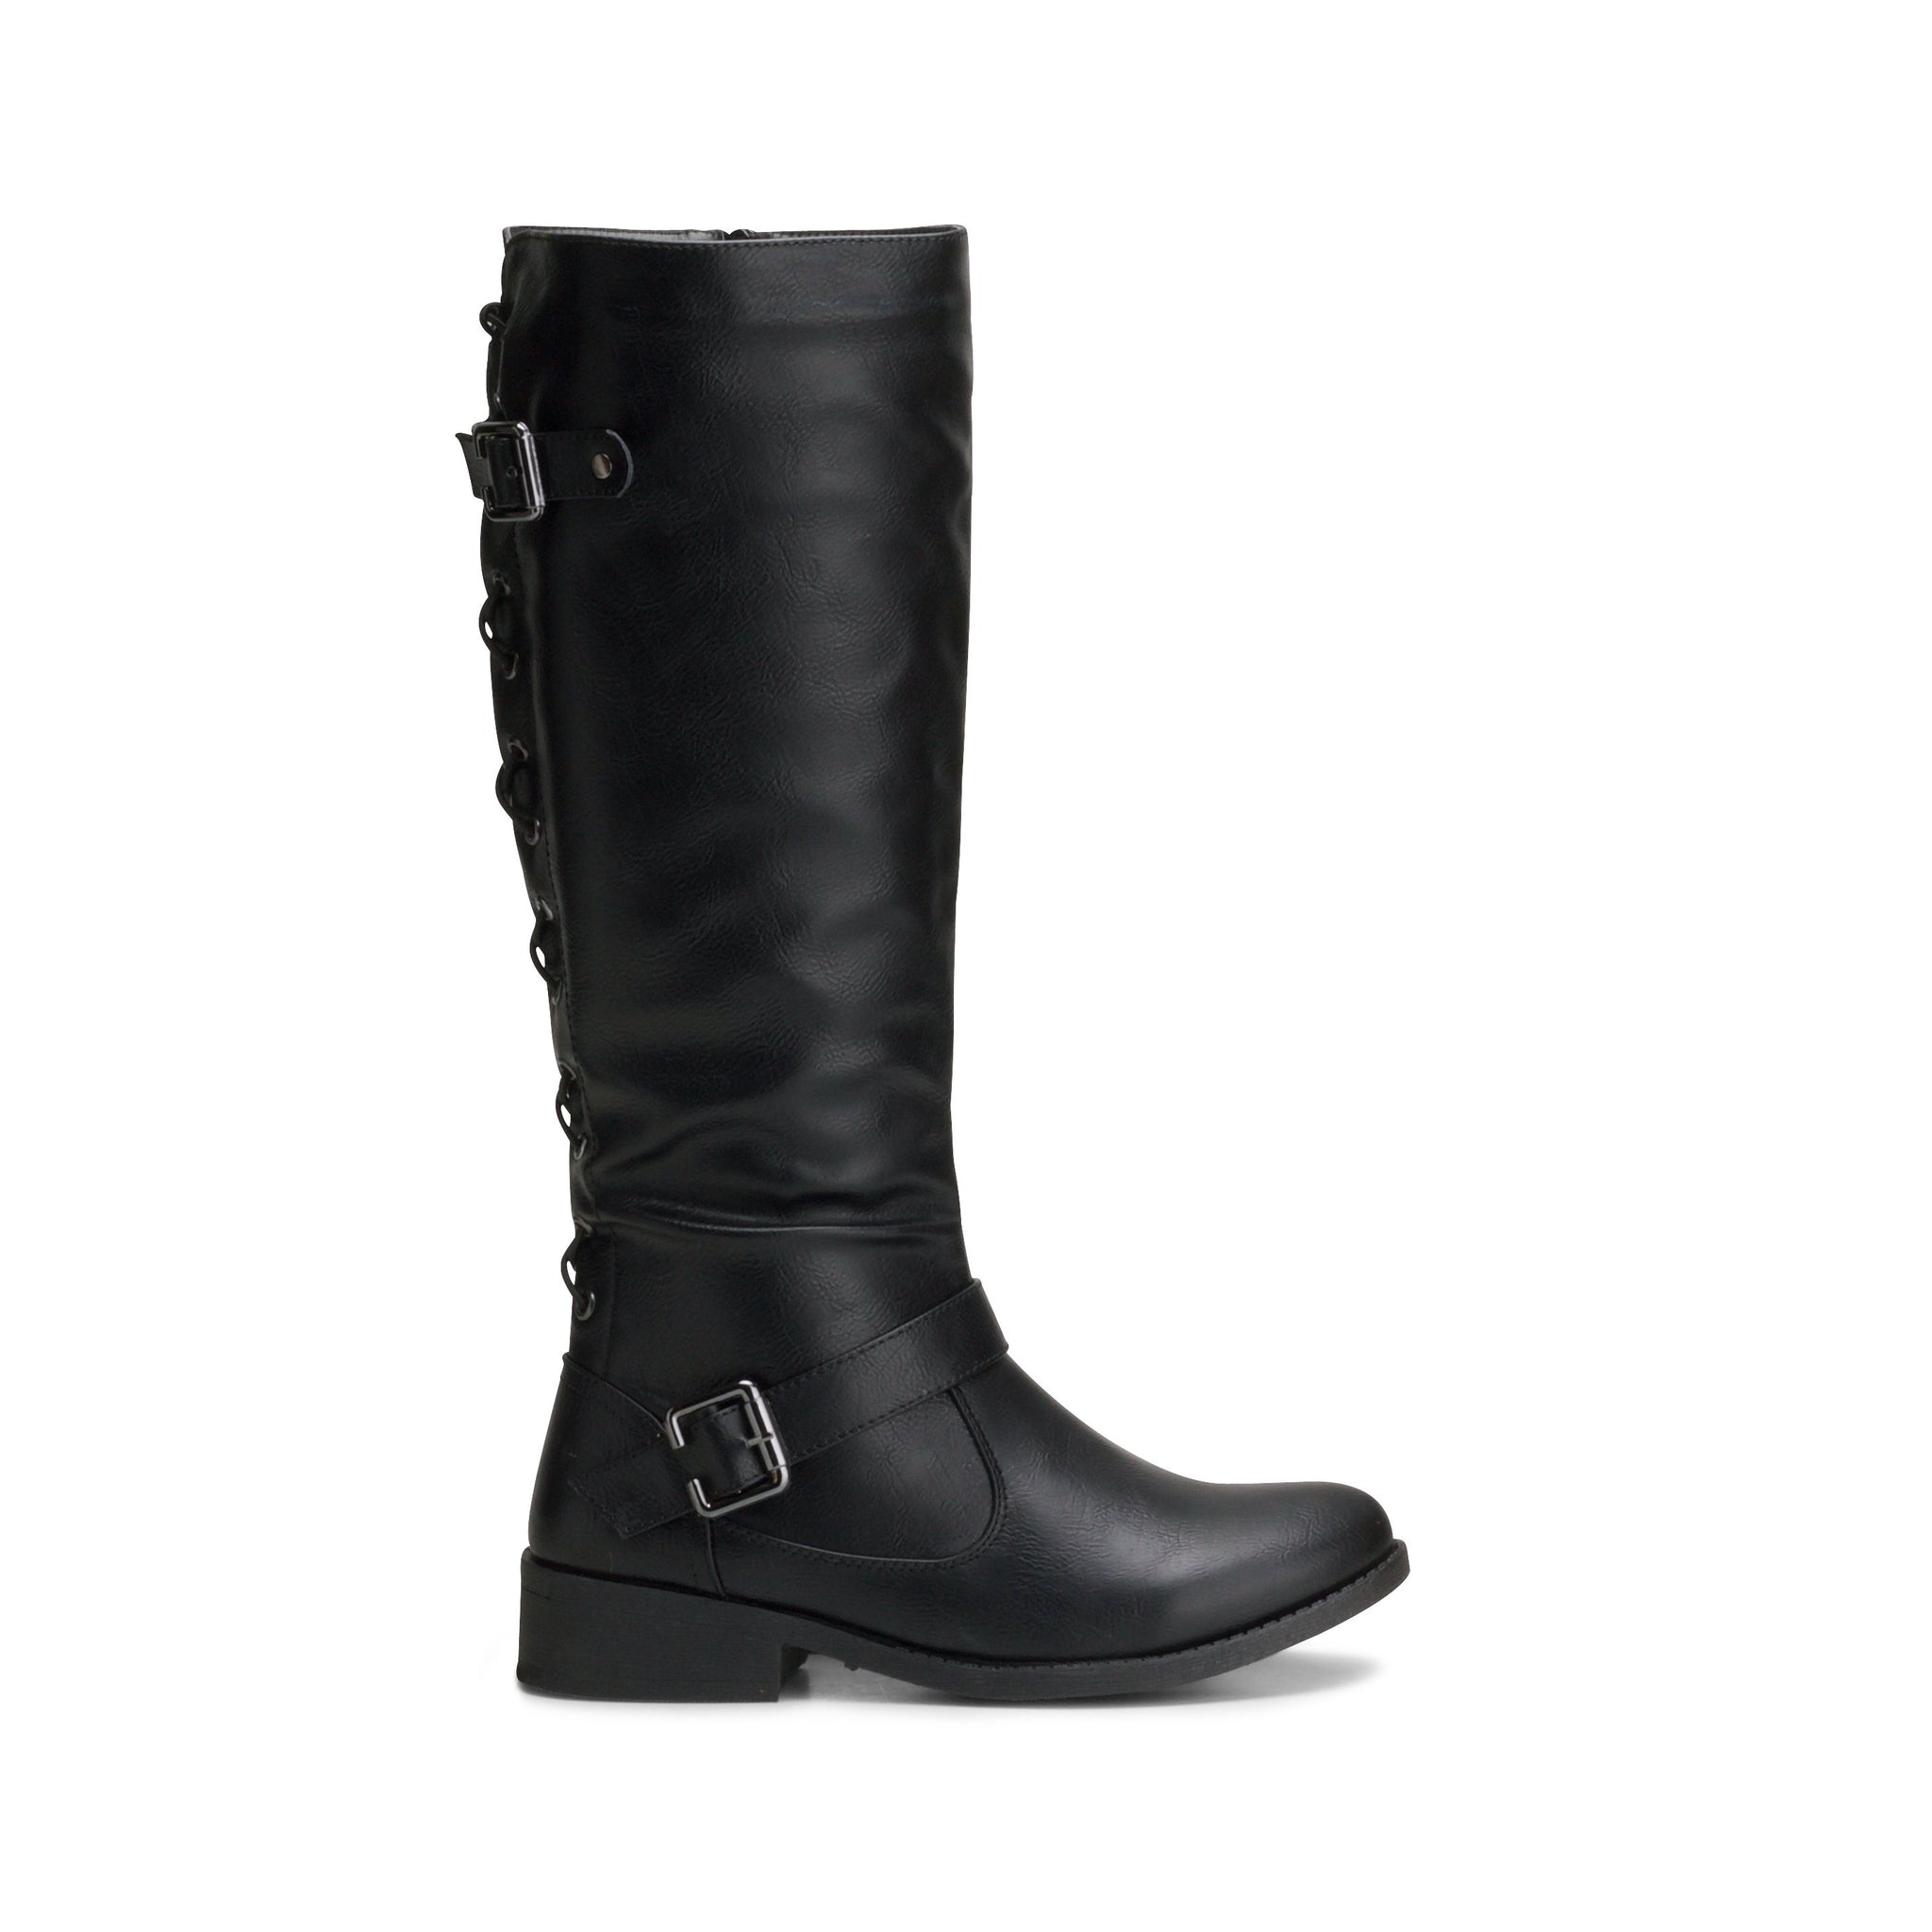 women's lace up back riding boots